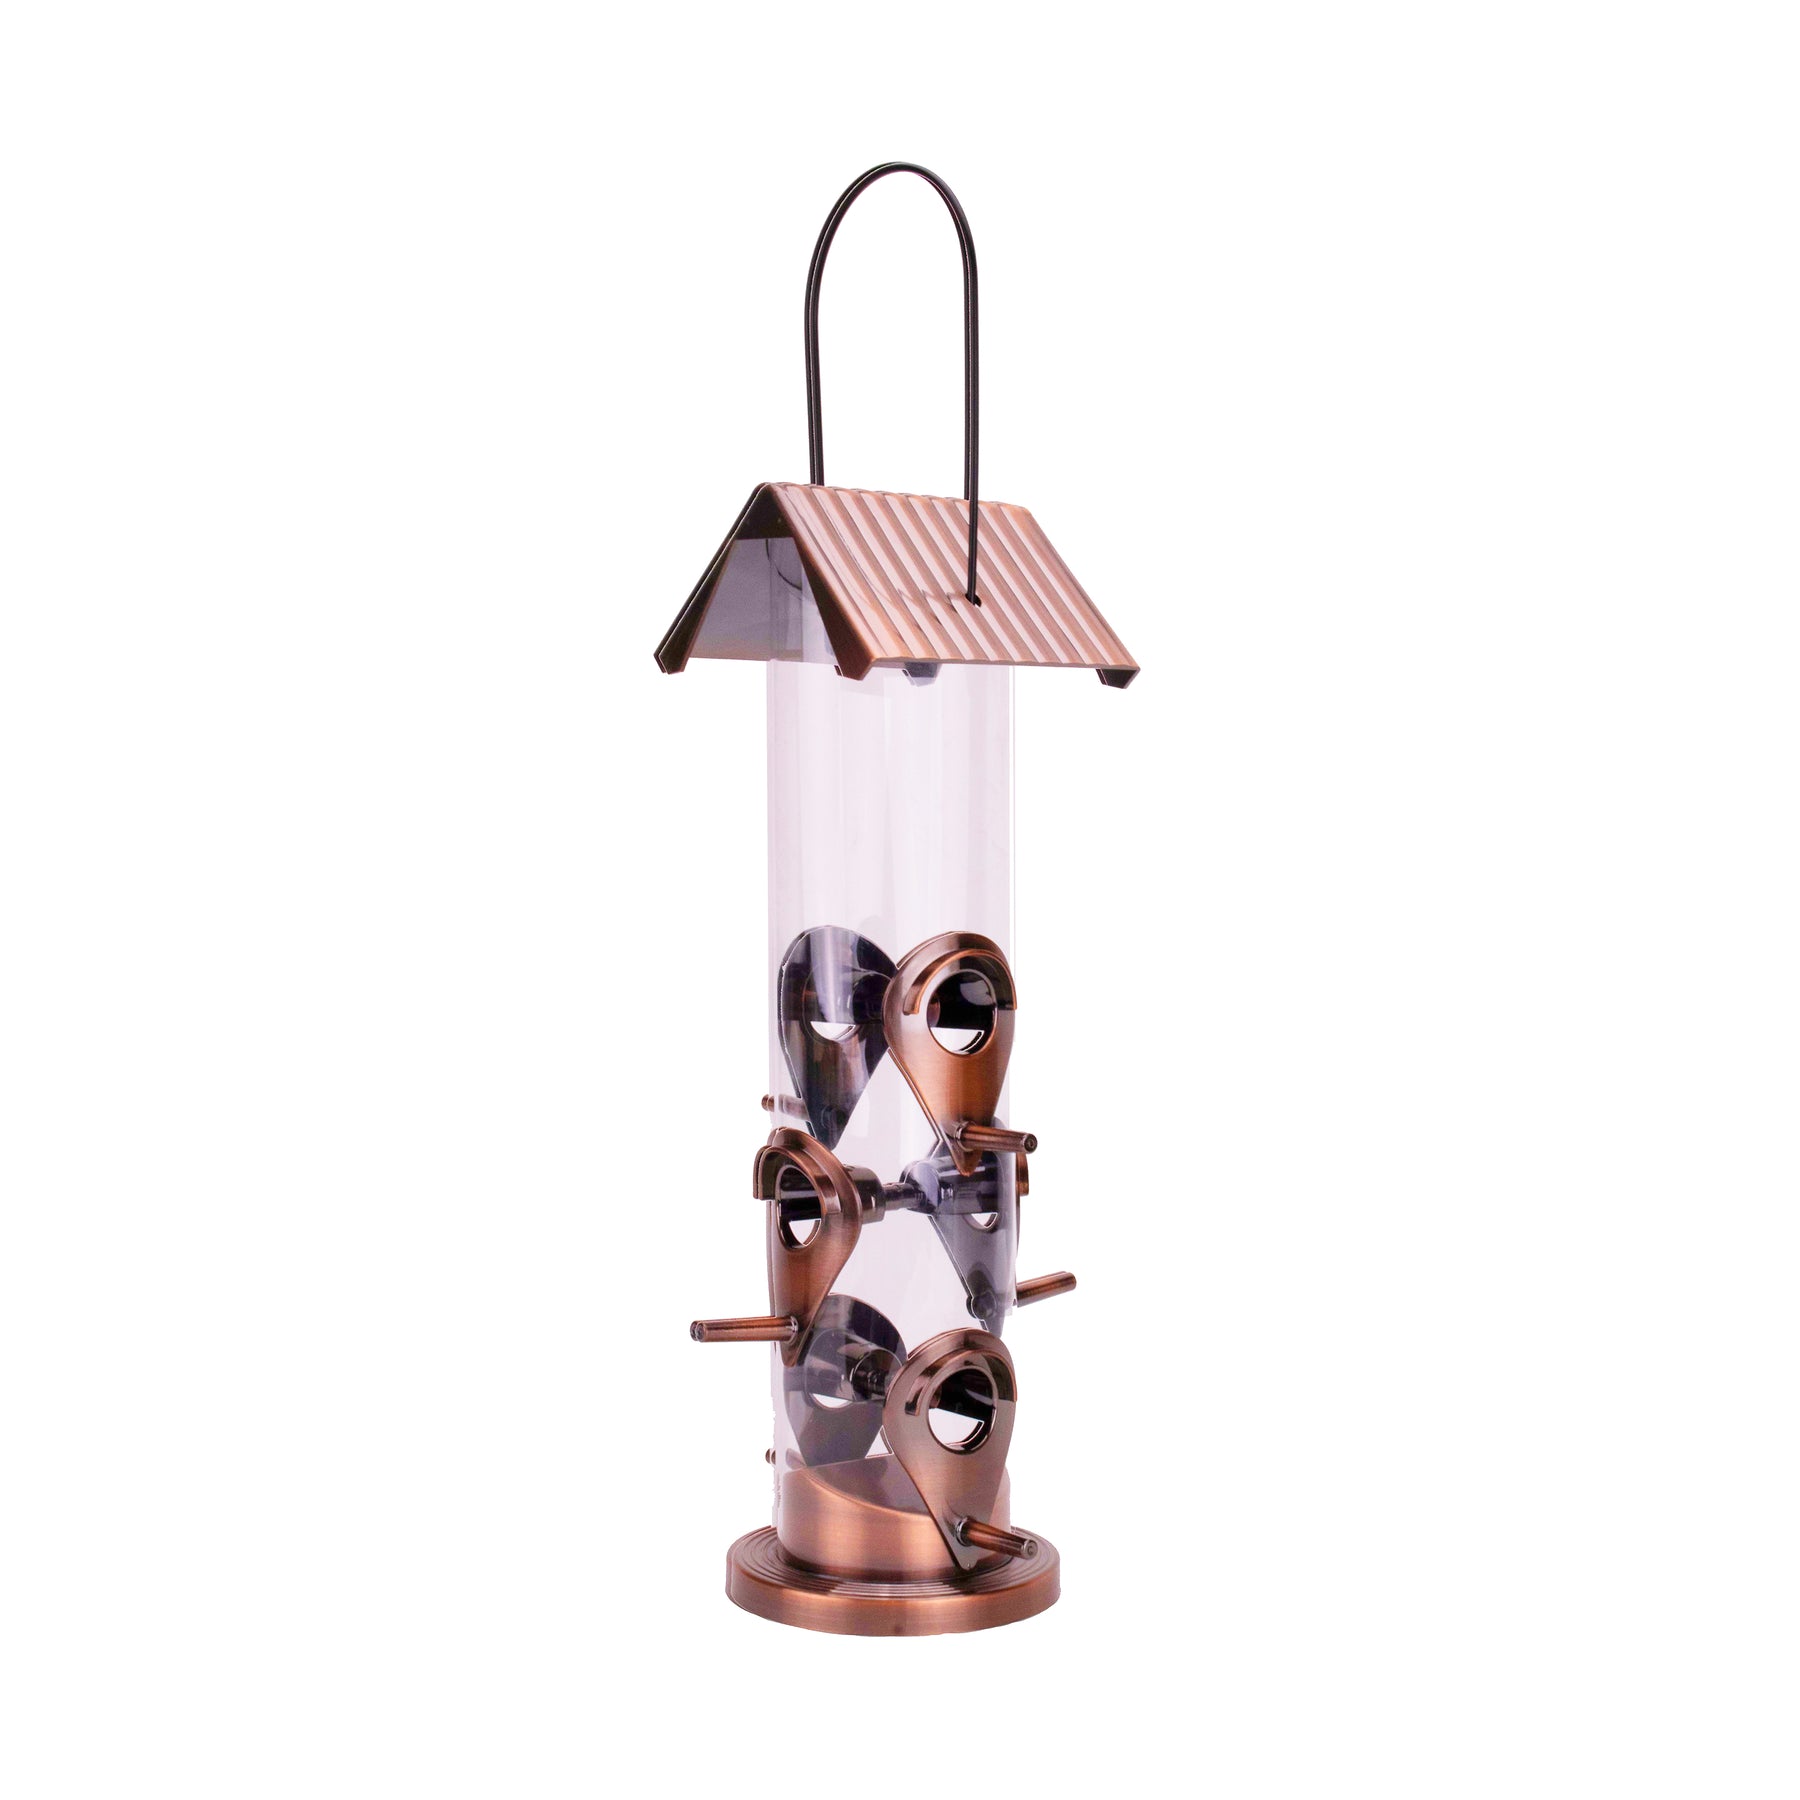 Bliss Outdoors 6-Port Bird Feeder with a copper base, perches, and lid.